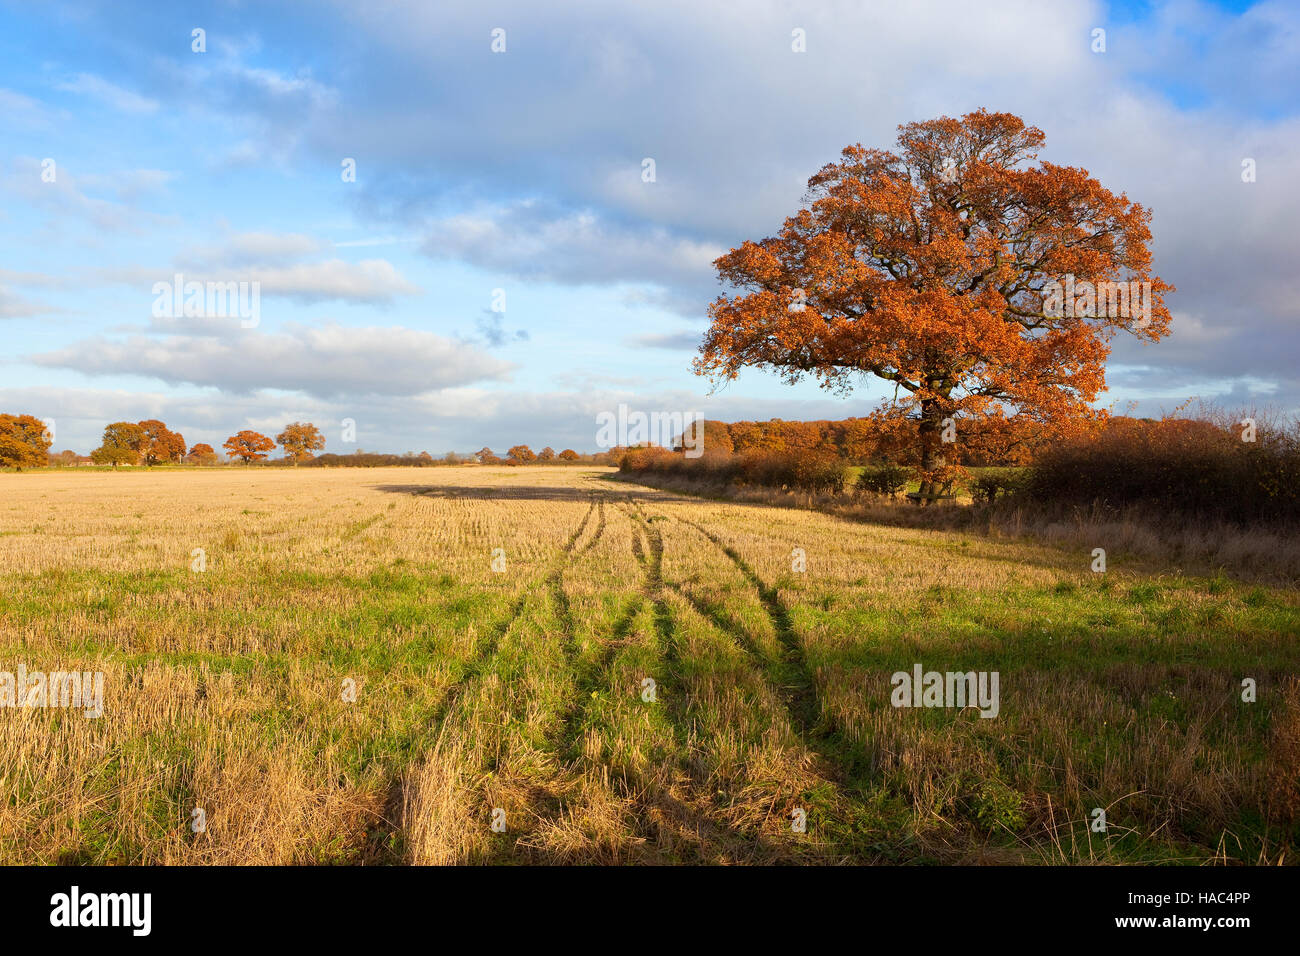 English landscape with an Oak tree with bright orange autumn foliage by a weedy stubble field. Stock Photo